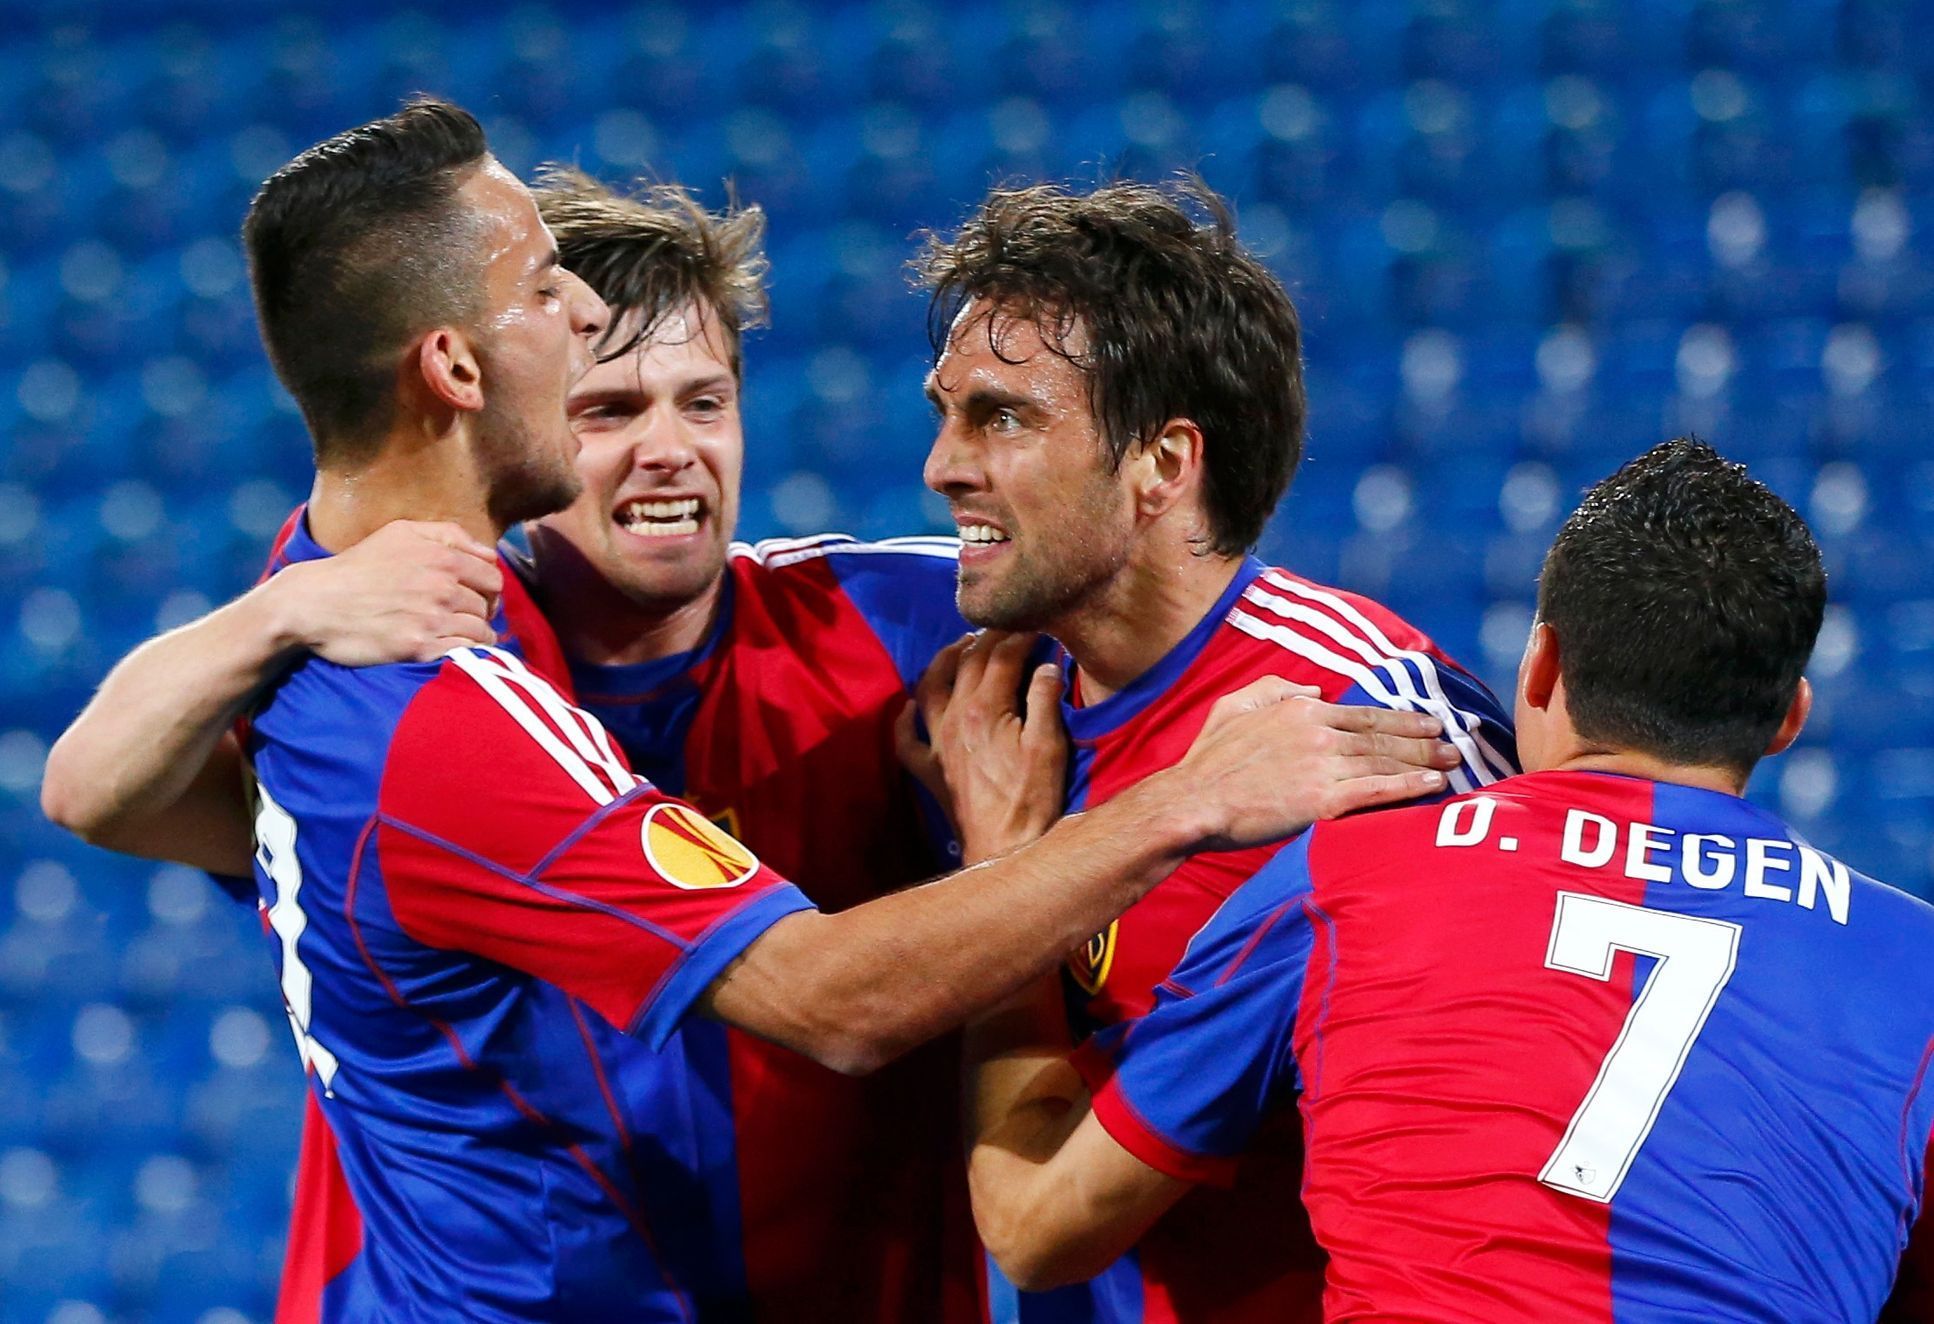 FC Basel's Delgado celebrates with team mates Stocker, Degen and Aliji after scoring a goal against Valencia during their Europa League quarter-final first leg soccer match in St.Jakob-Park stadium in